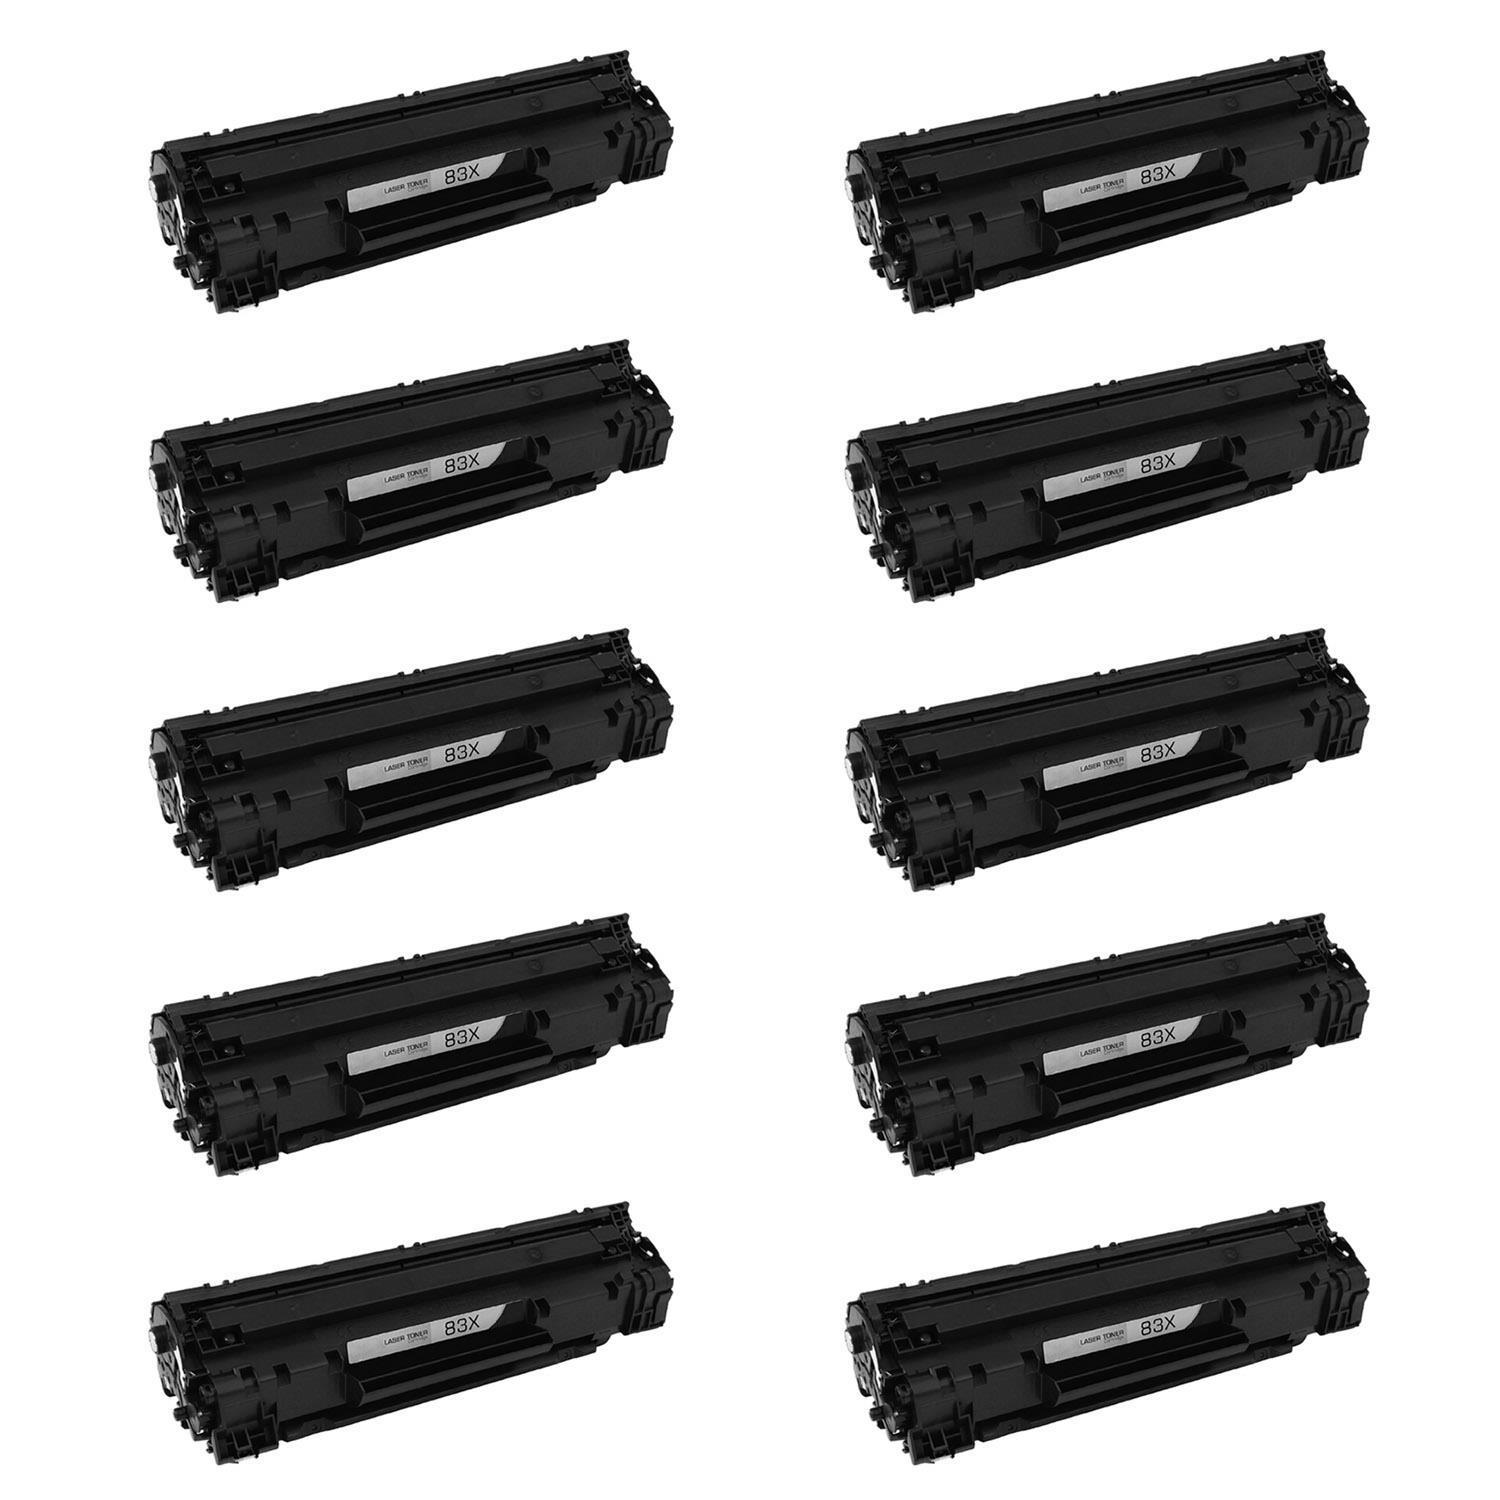 HP 83X CF283X 10 PACK COMBO GENERIC COMPATIBLE Toner Cartridge click here for models